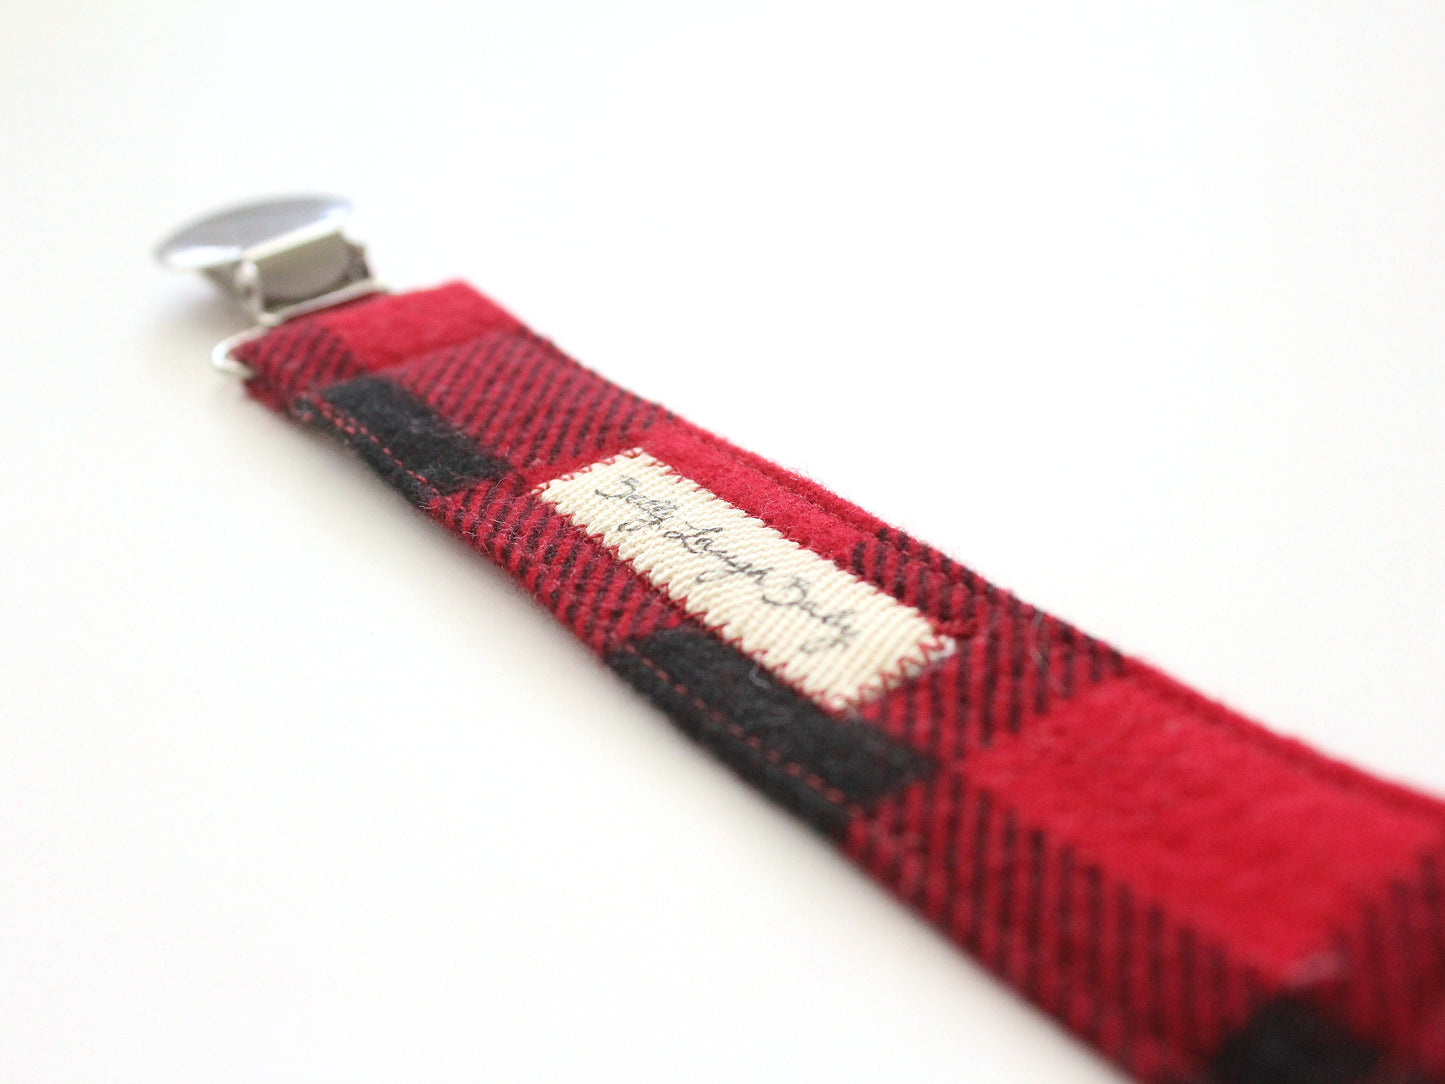 Red Buffalo Check Fabric Pacifier Clip | Gender Neutral Baby Gift | Soother Leash Binky Holder | CPSC Compliant